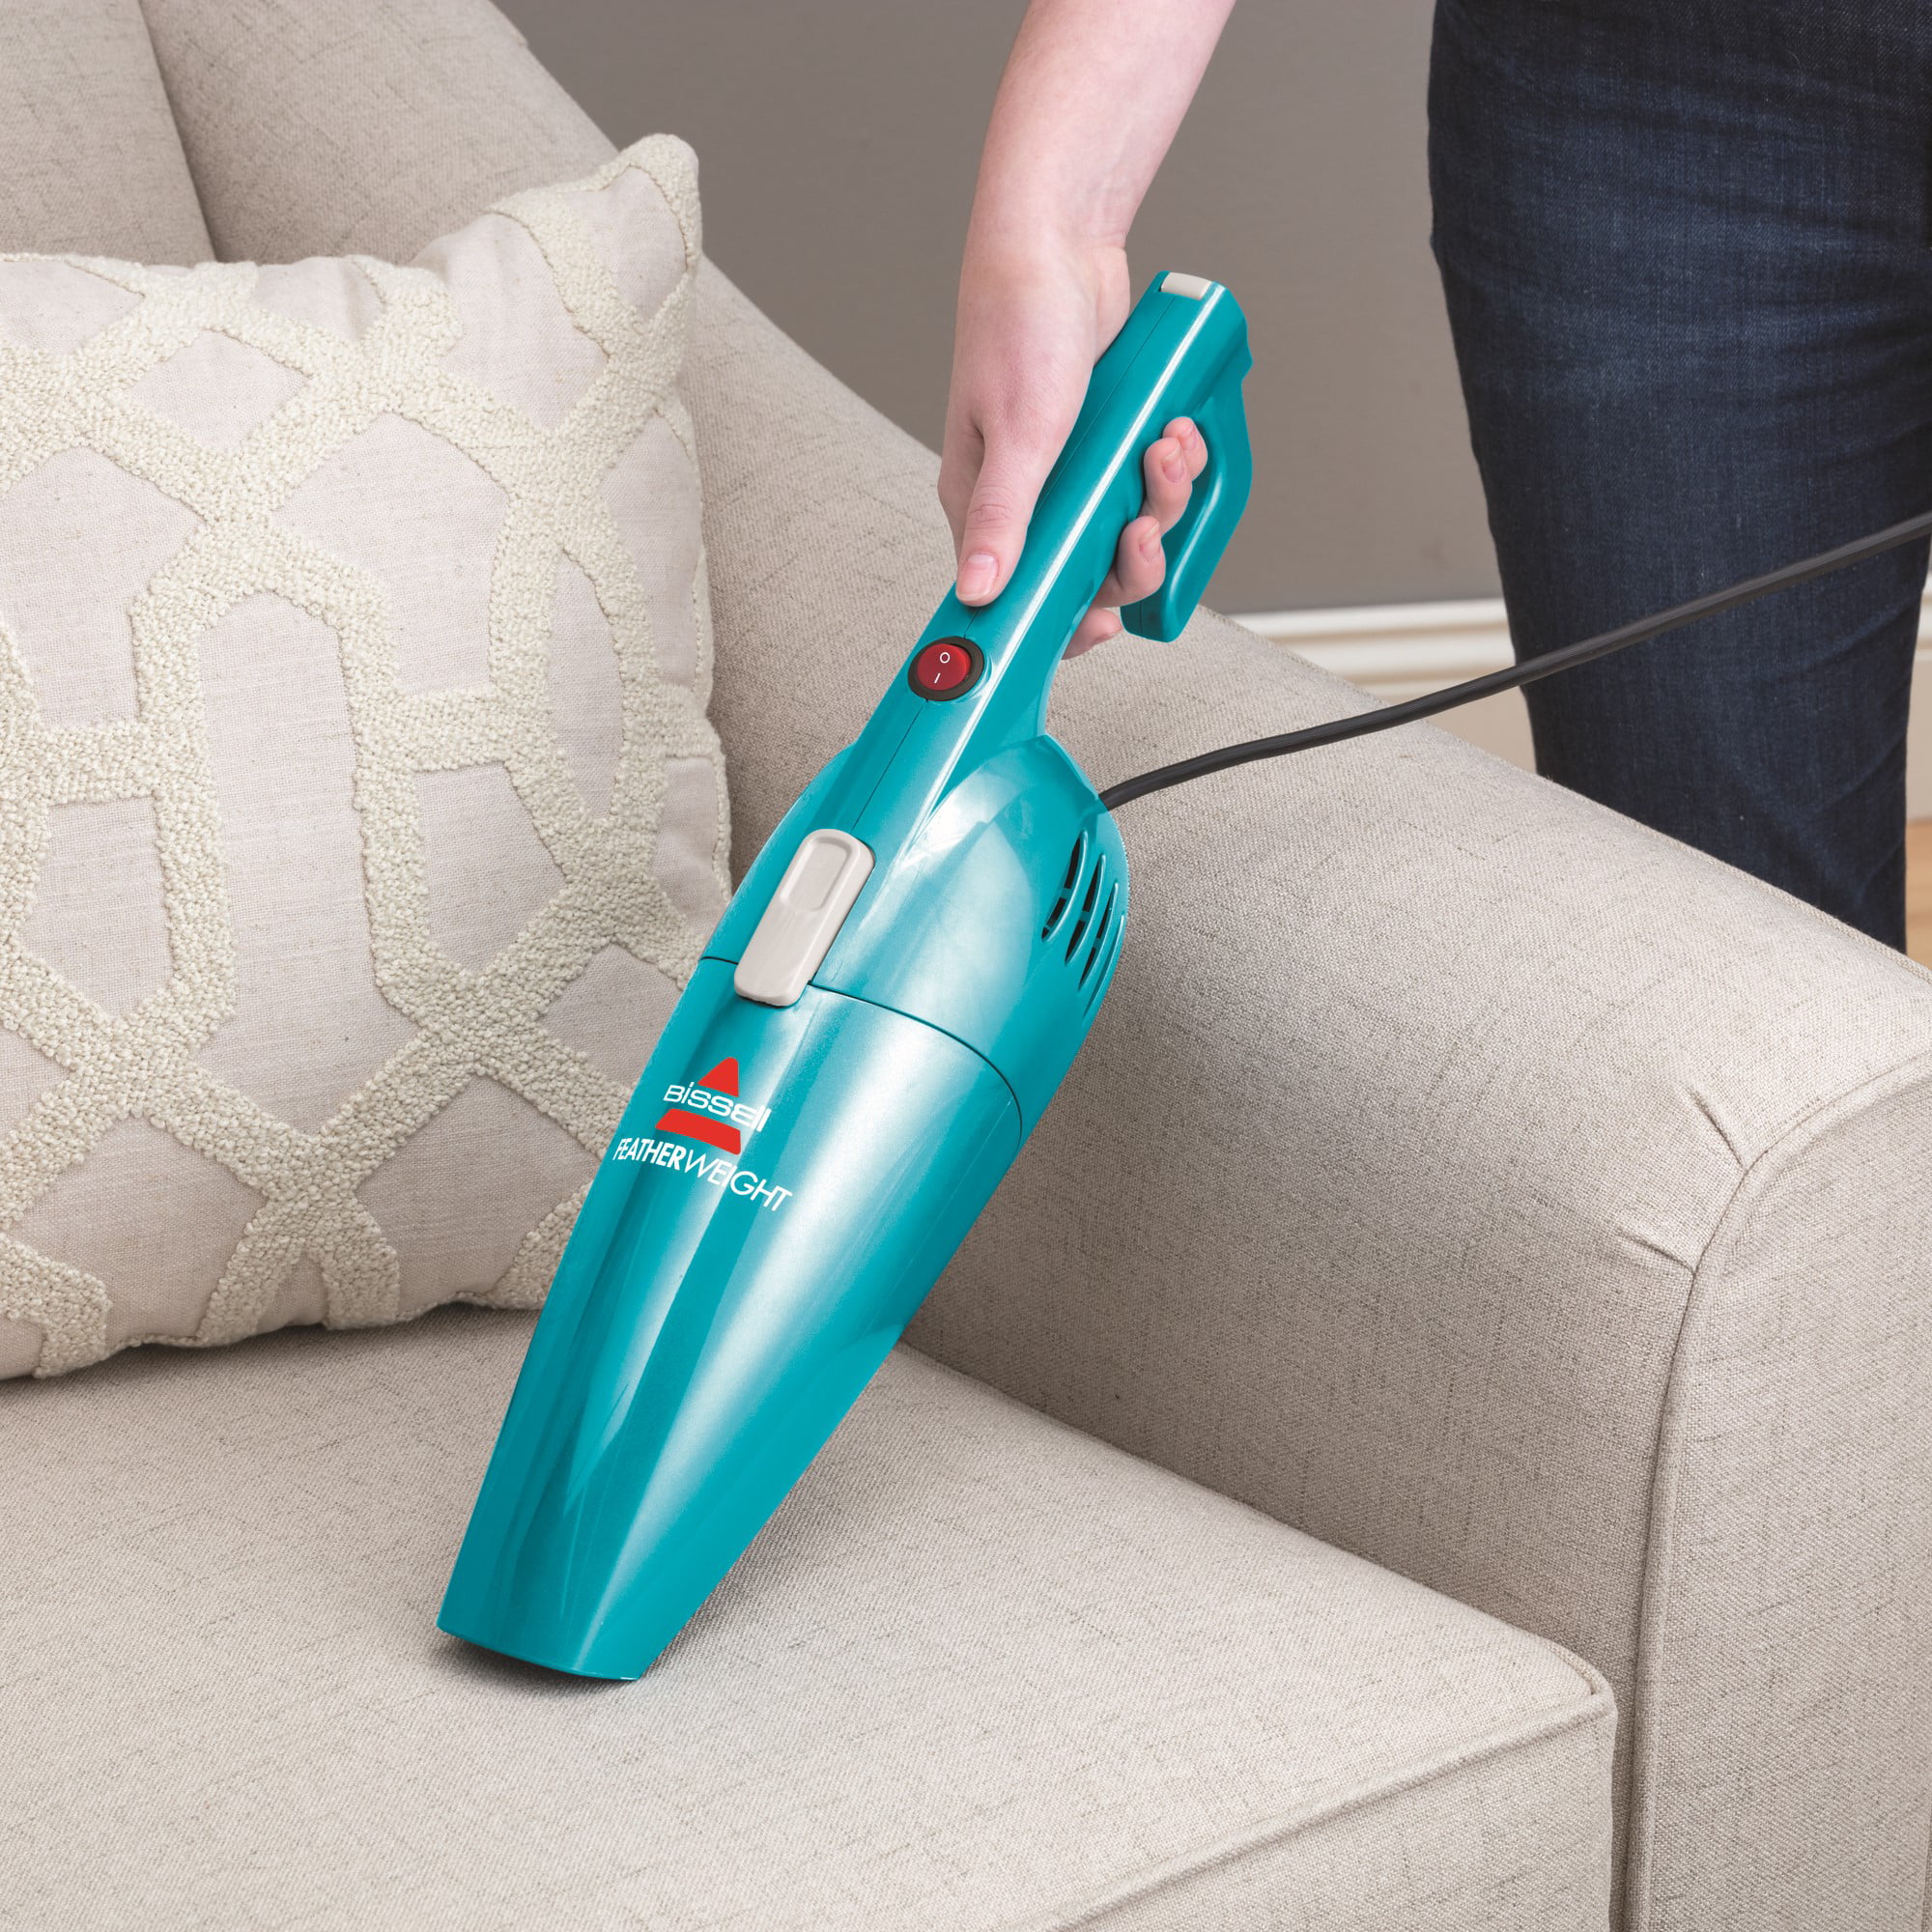 BISSELL Featherweight Stick Lightweight Bagless Vacuum & Electric Broom in Teal, BSL2033 - 2